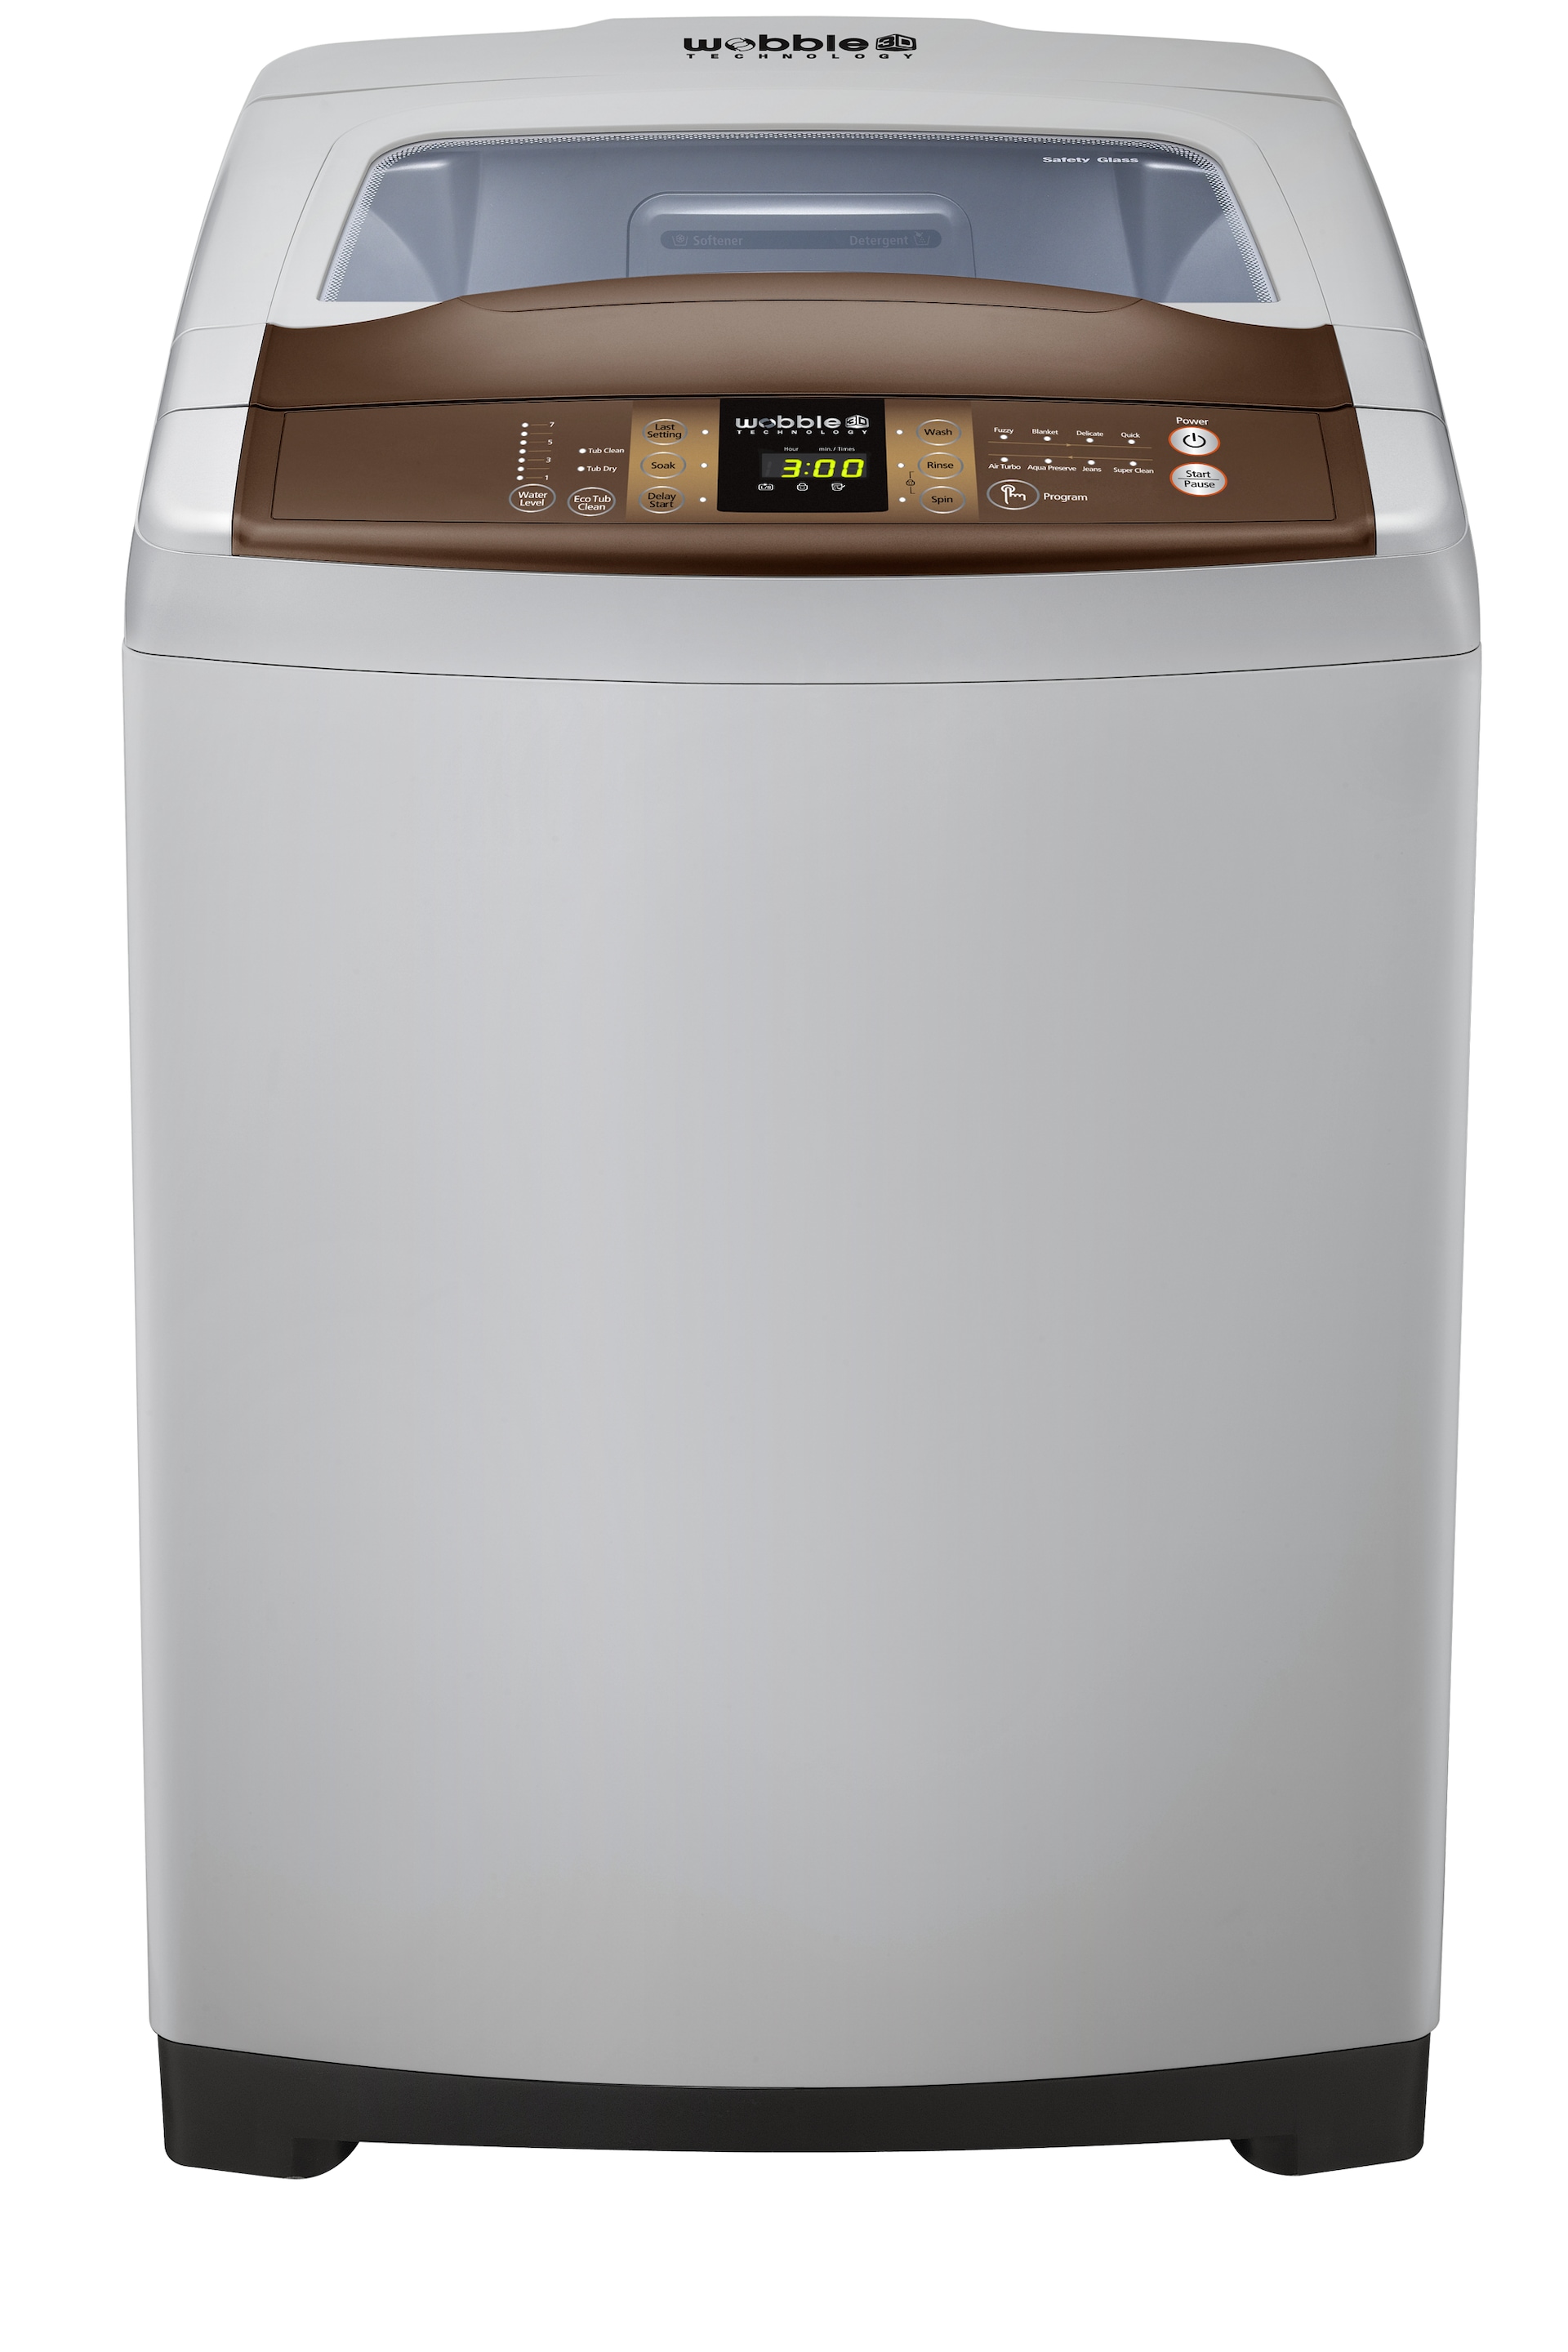 How to operate samsung wobble technology washing machine